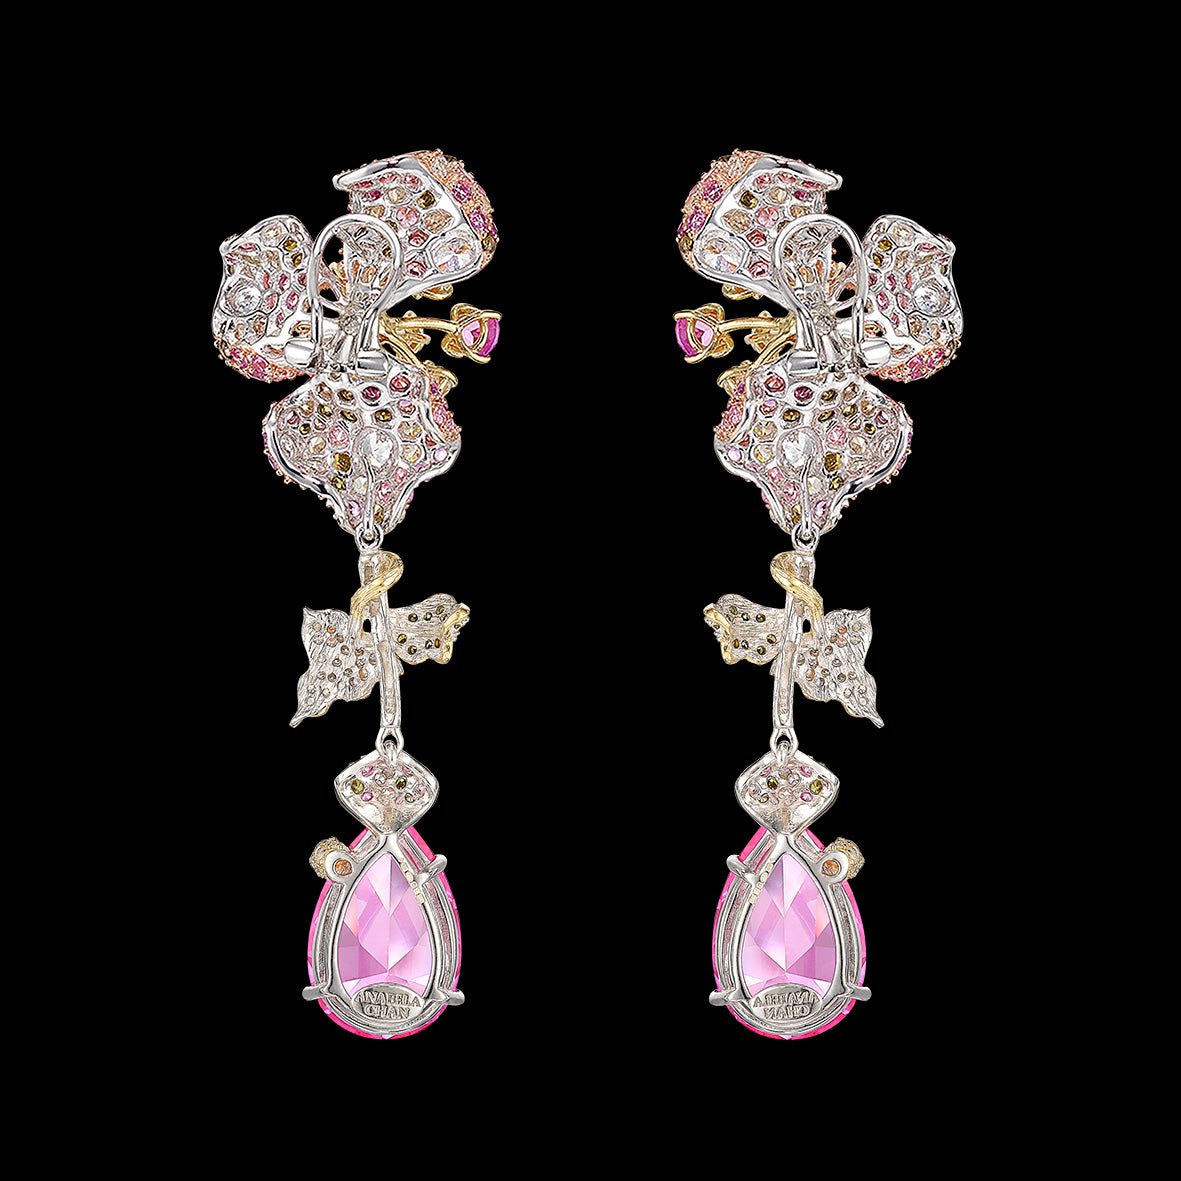 Blush Orchid Earrings, Earrings, Anabela Chan Joaillerie - Fine jewelry with laboratory grown and created gemstones hand-crafted in the United Kingdom. Anabela Chan Joaillerie is the first fine jewellery brand in the world to champion laboratory-grown and created gemstones with high jewellery design, artisanal craftsmanship and a focus on ethical and sustainable innovations.